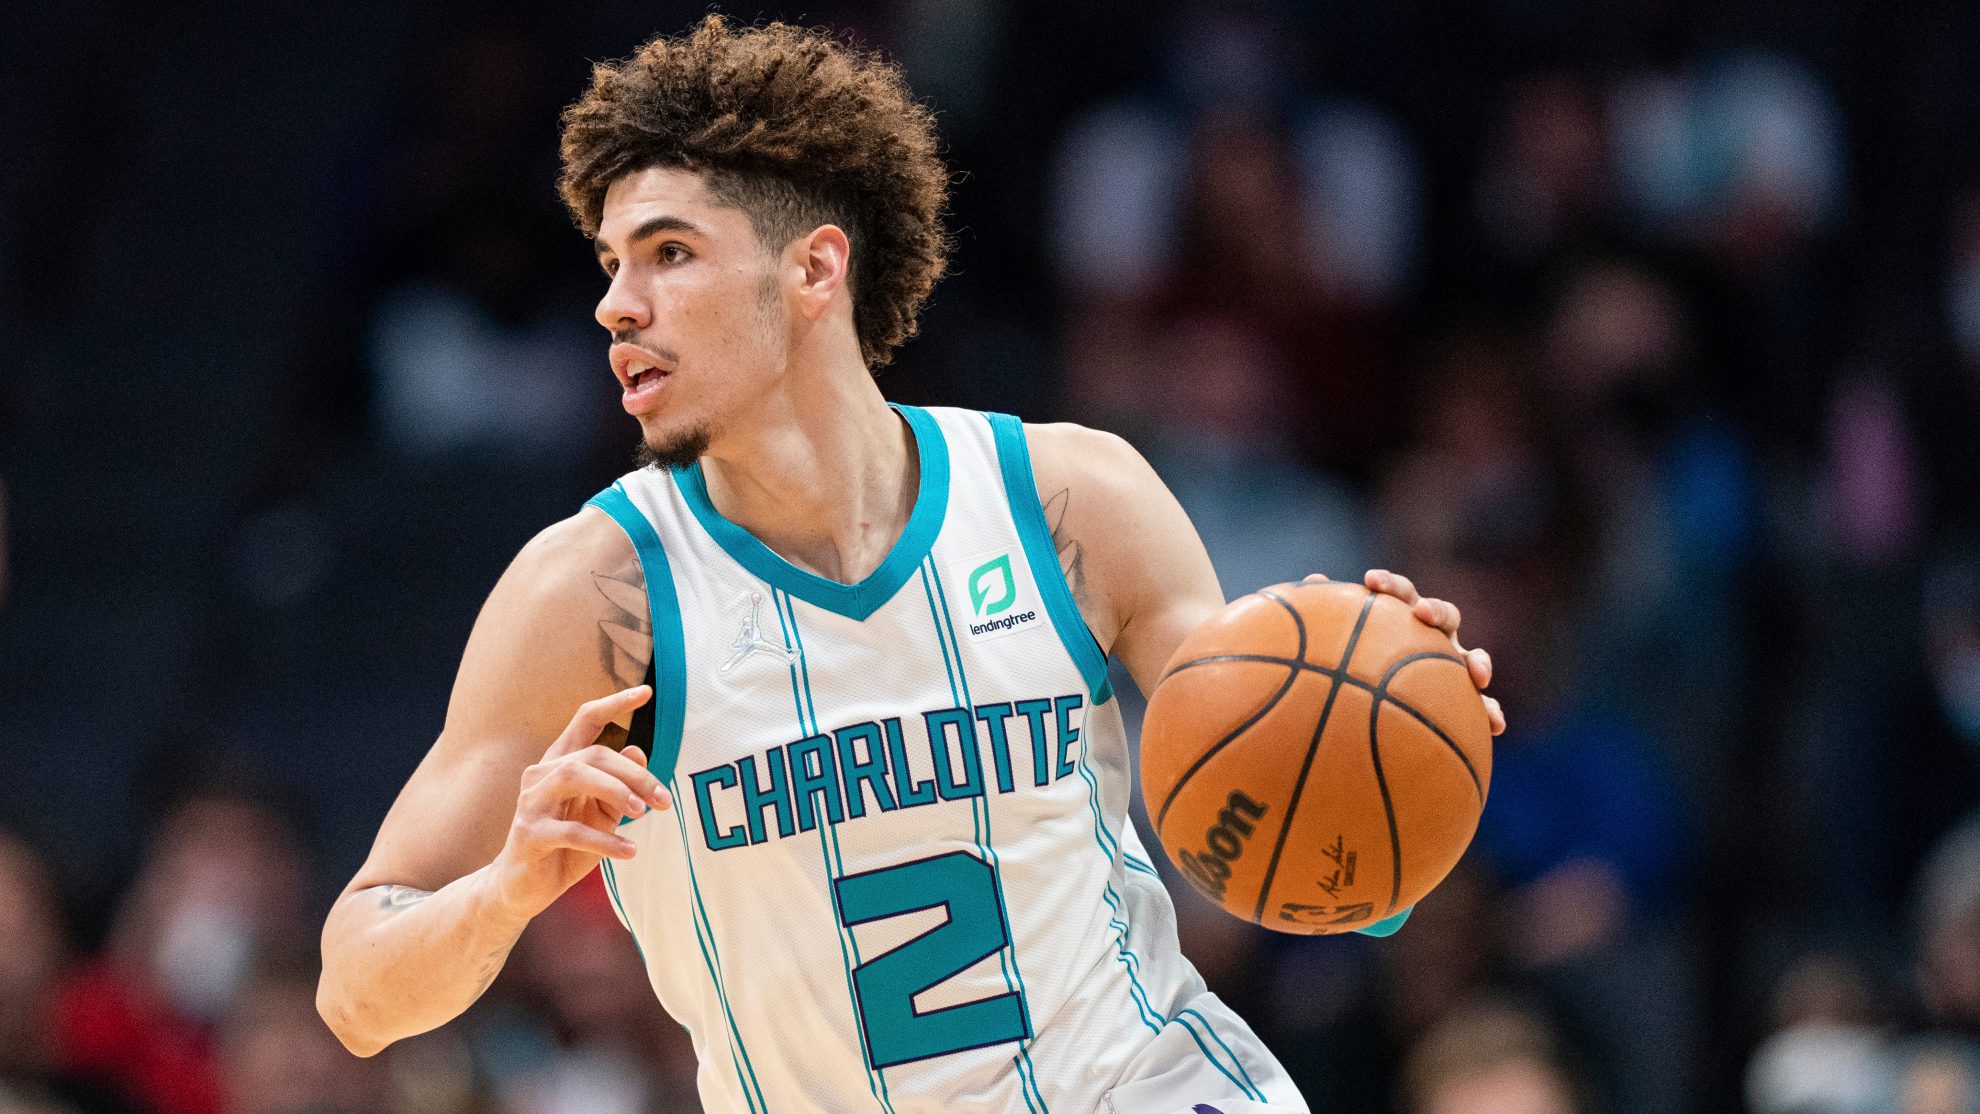 LaMelo Ball Scores Career-High 38 Points in Loss to Celtics